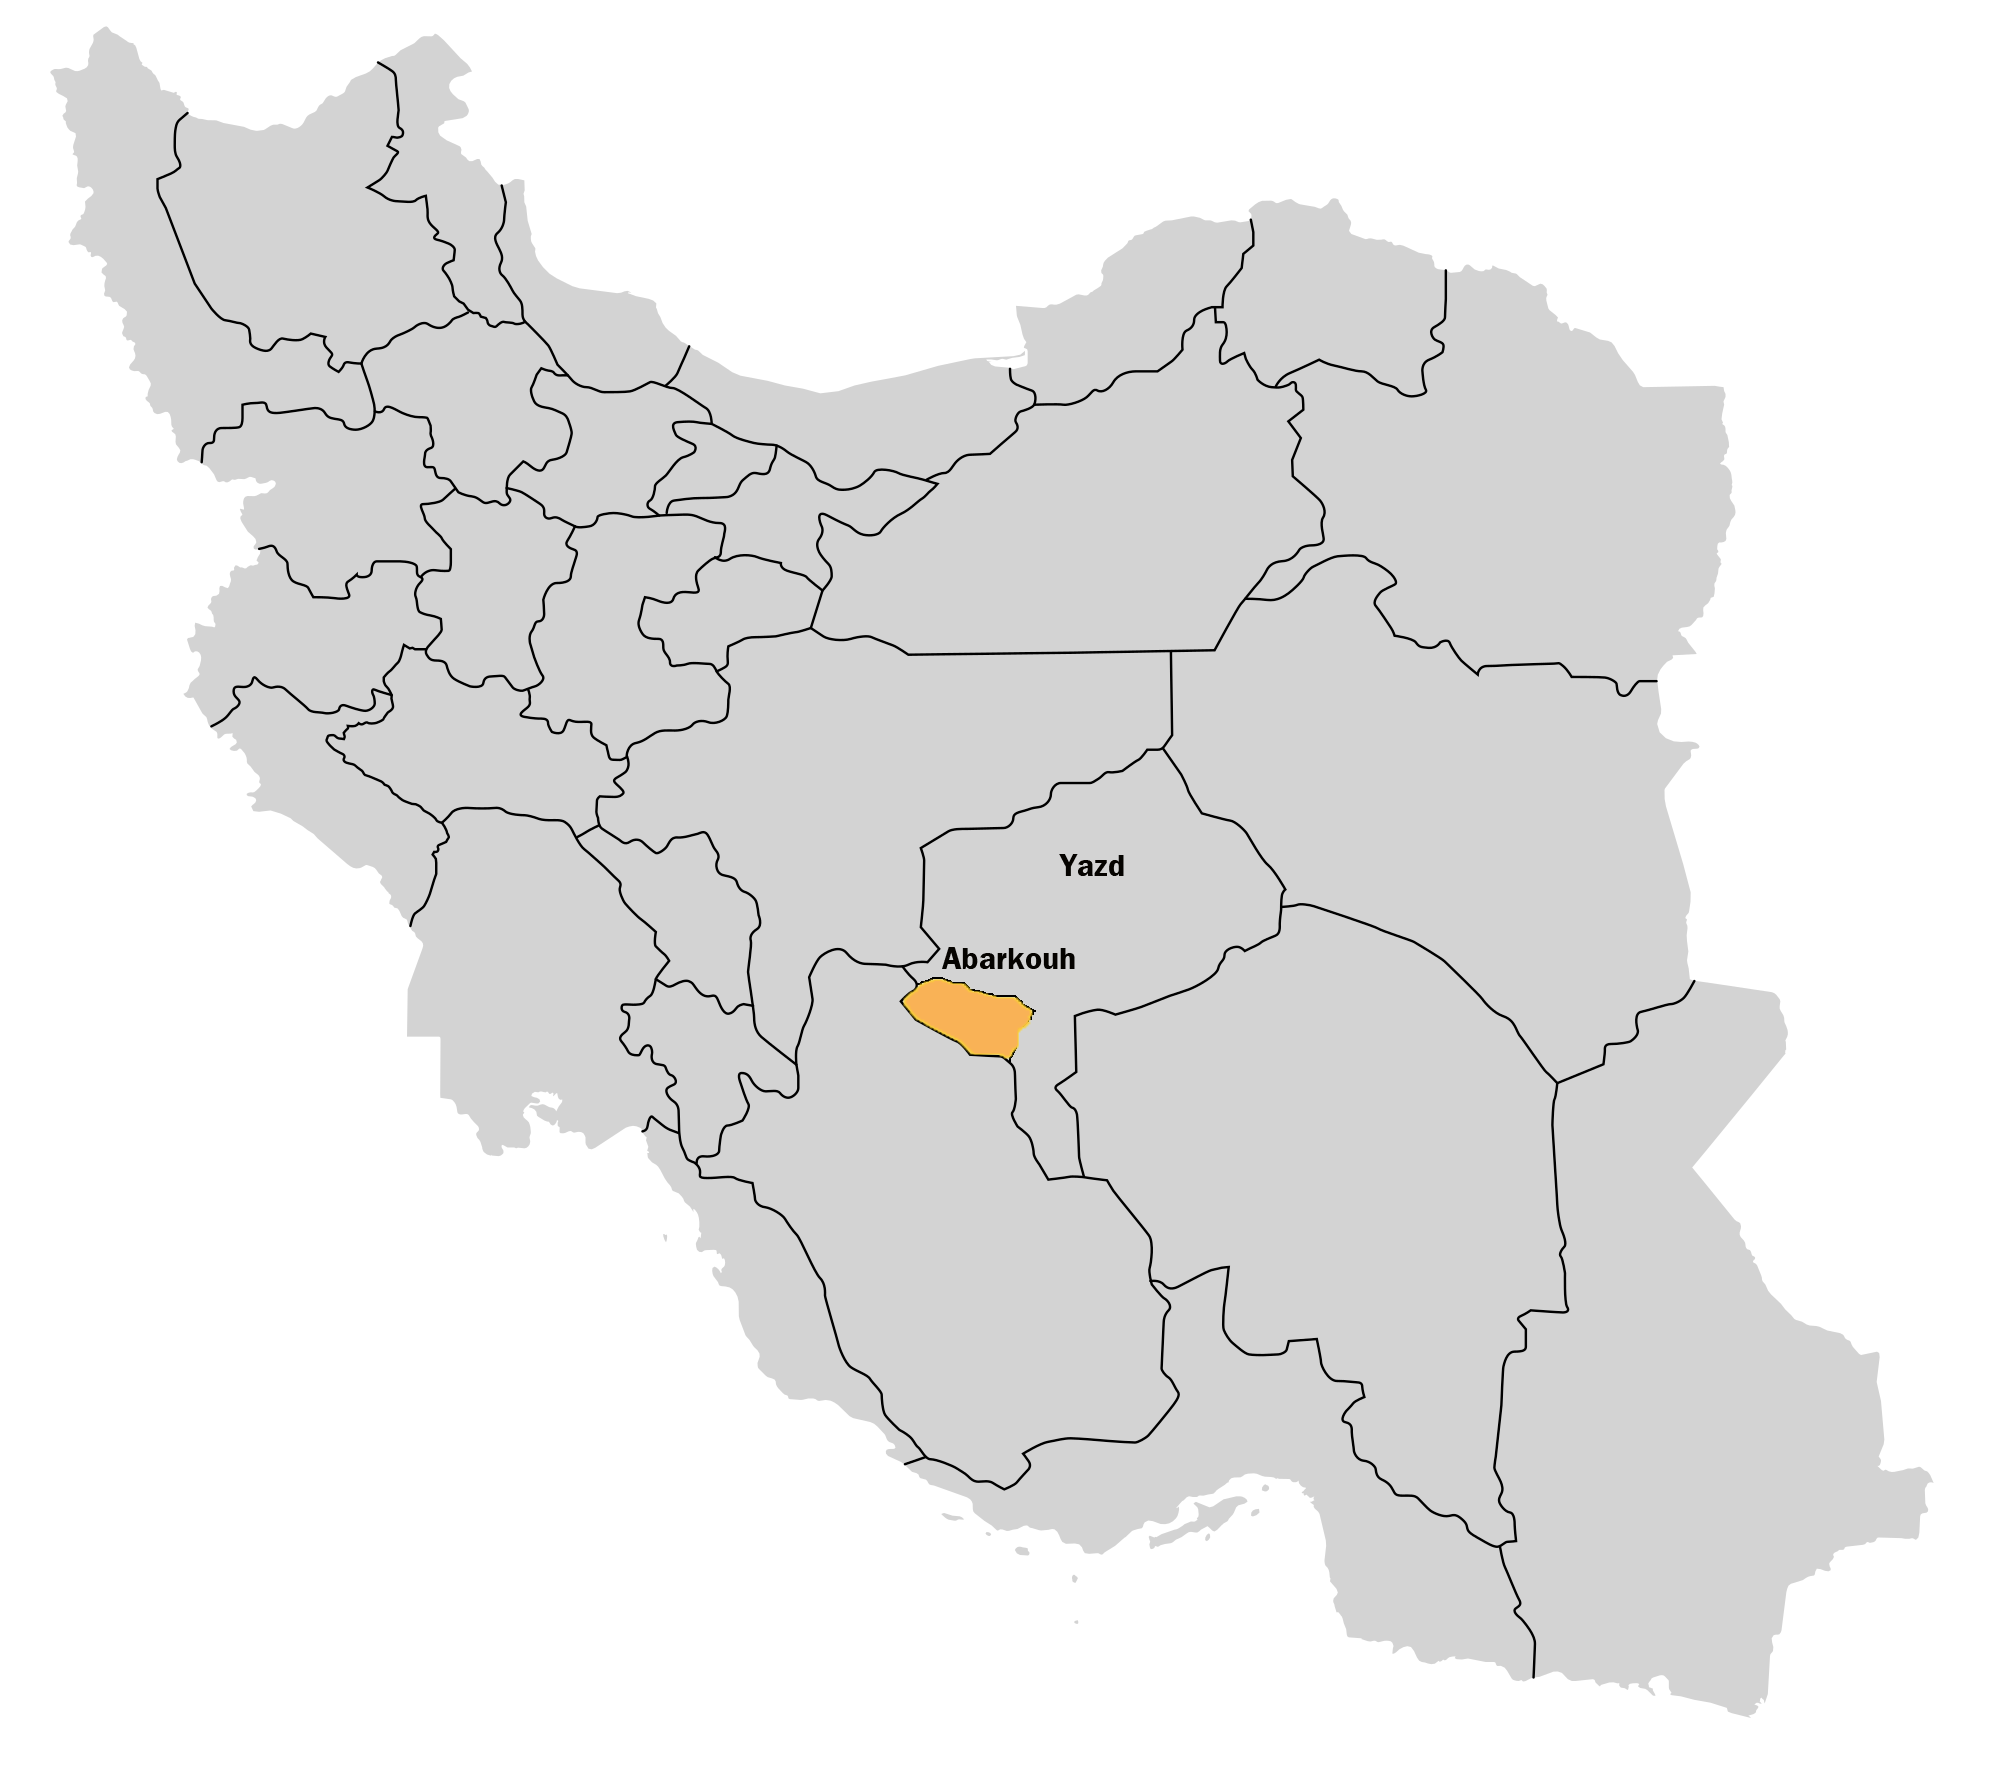 Abarkouh On the Map of Iran